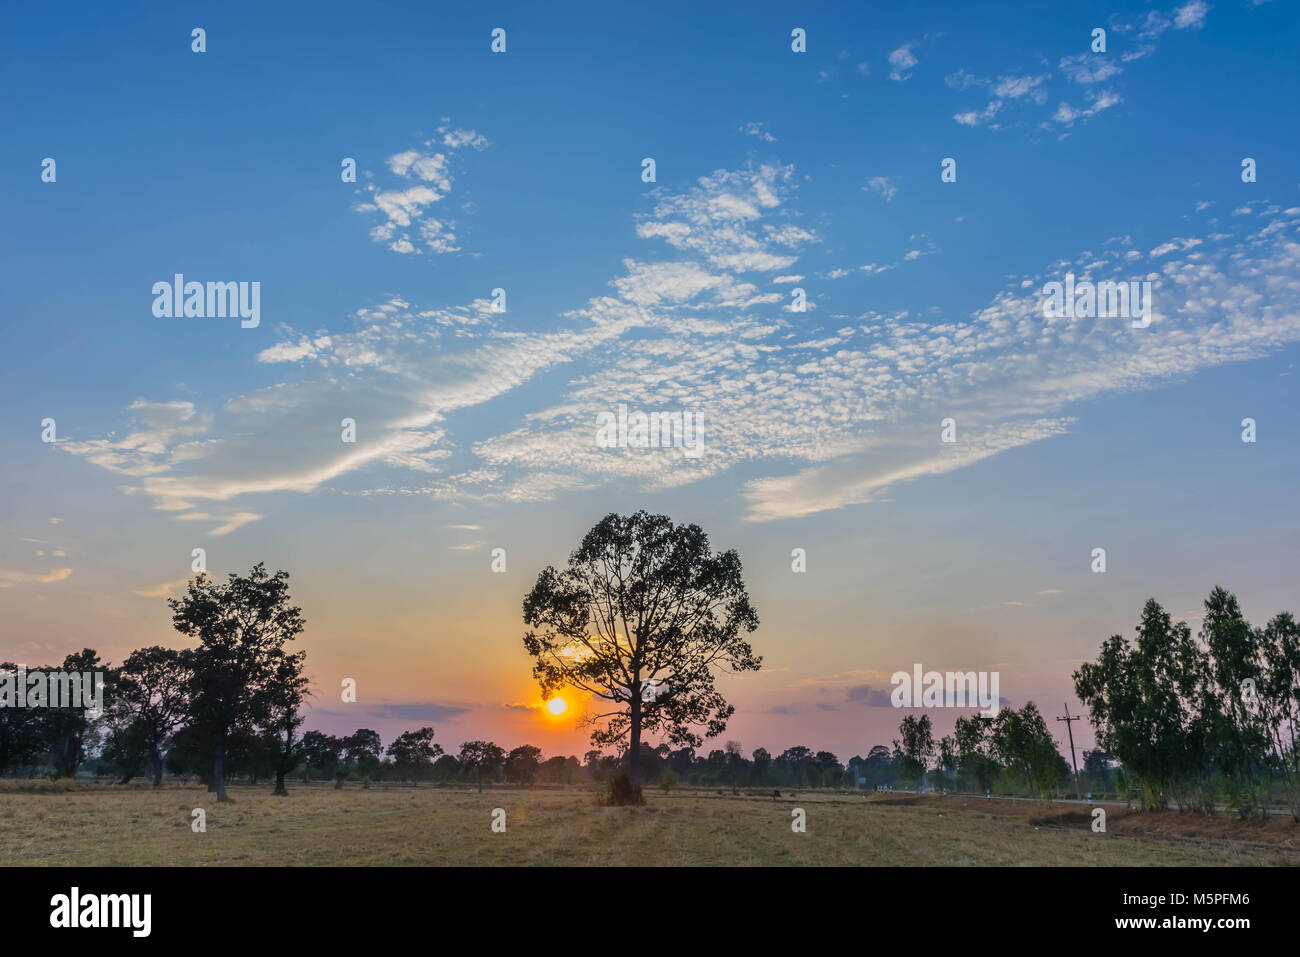 The silhouette the sunset with the paddy rice field,Dipterocapus alatus plant tree, the straw after harvest and the beautiful sky and cloud in the eve Stock Photo